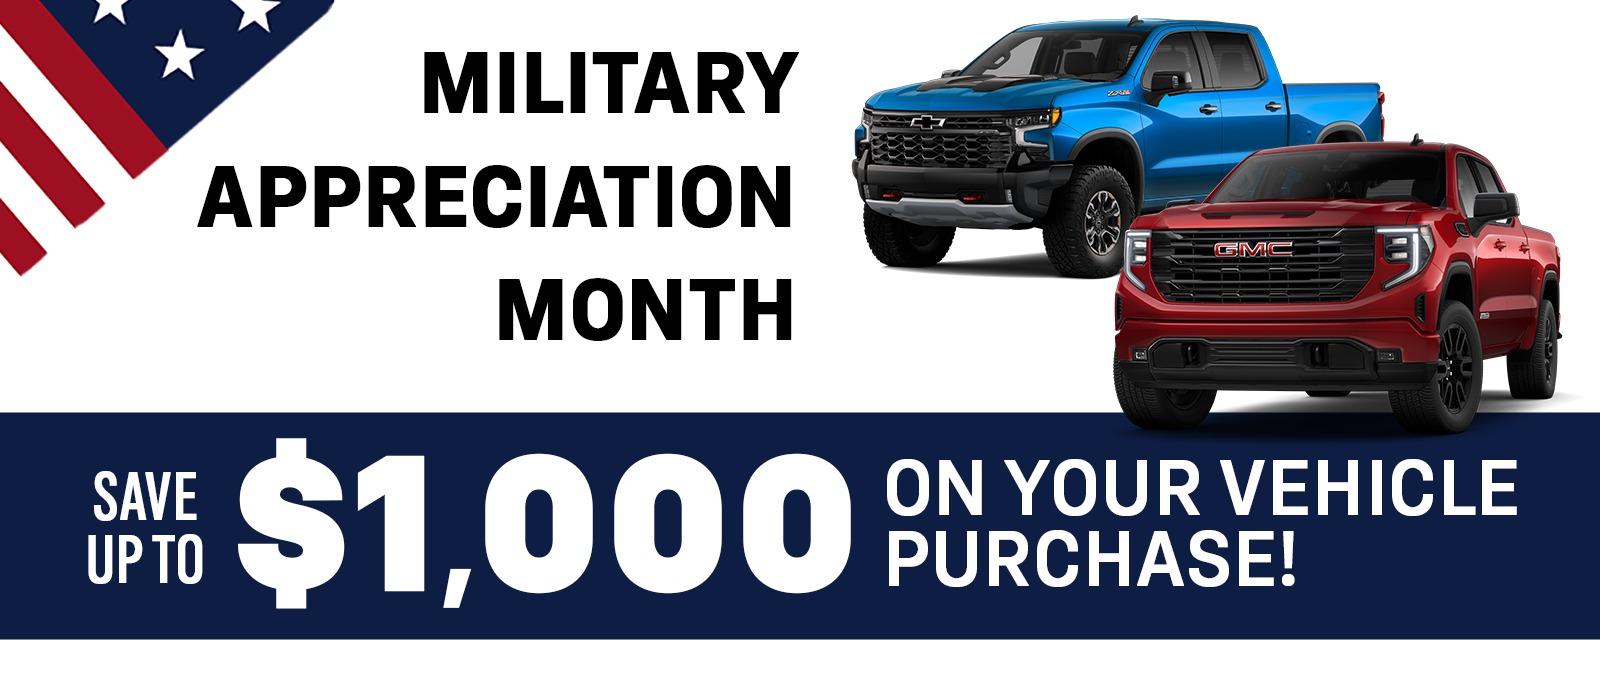 Military Appreciation Month Slide- May
Save upto $1,000 on your vehicle purchase!